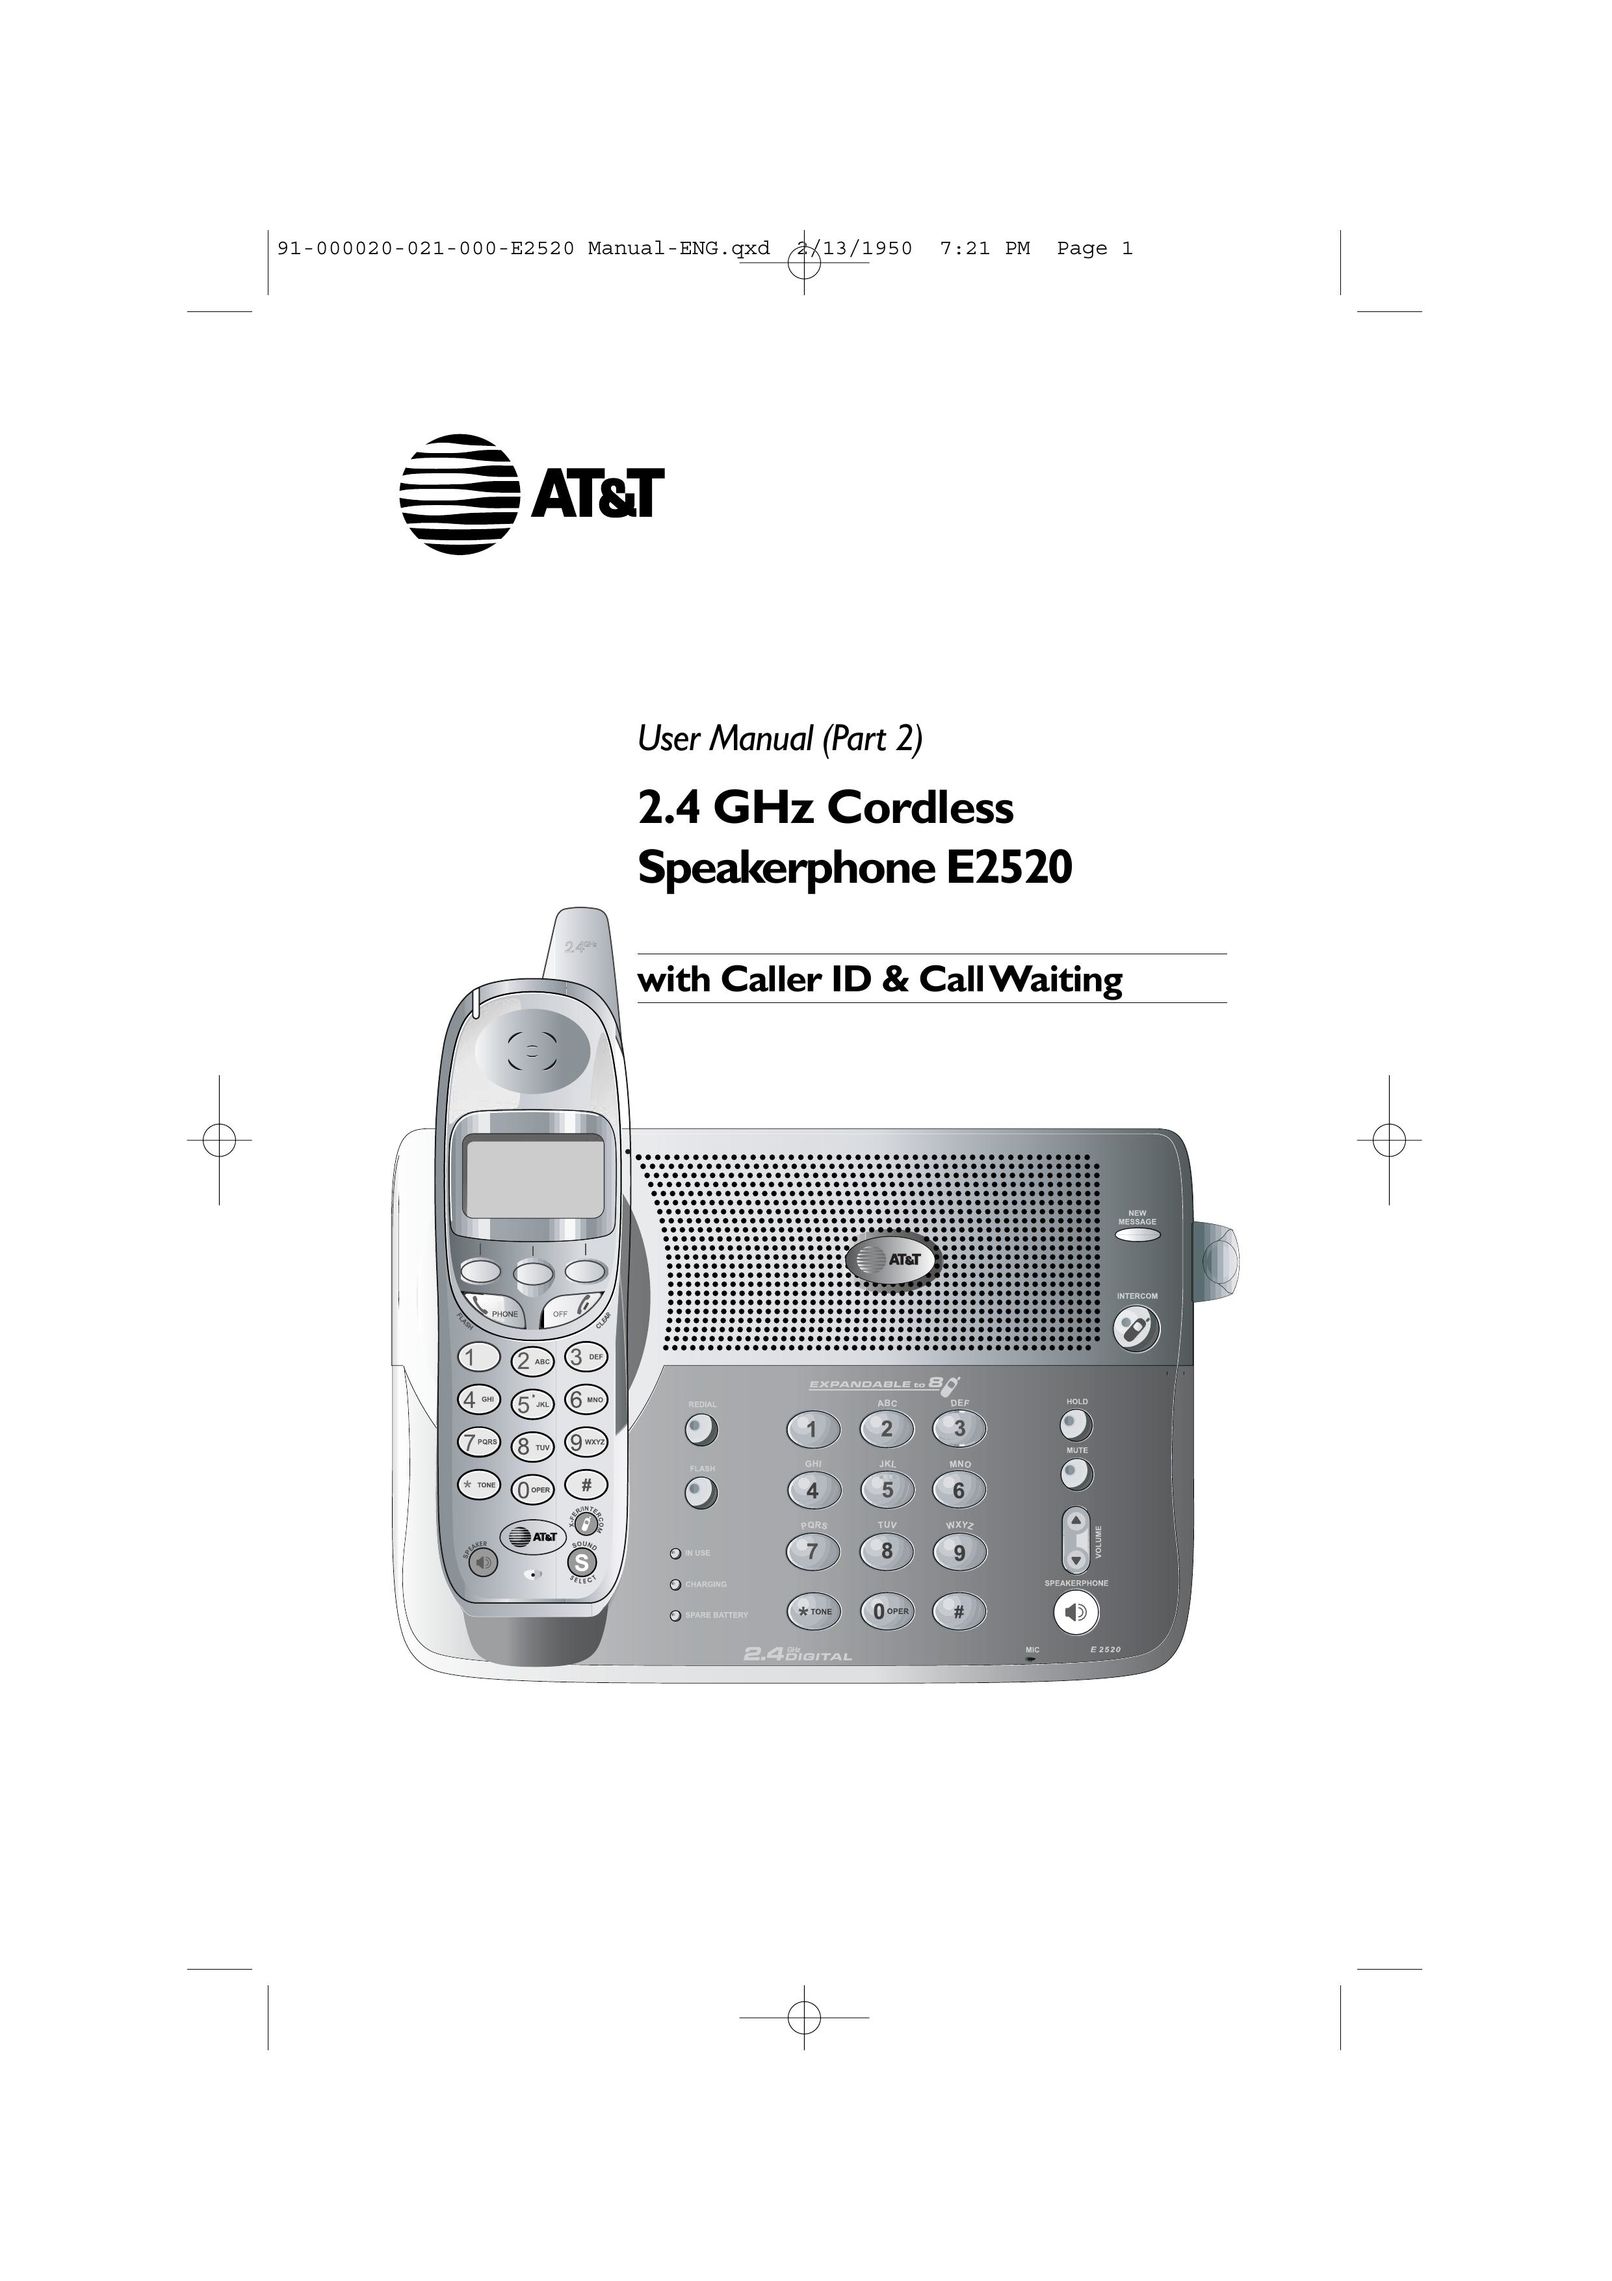 AT&T E2520 Conference Phone User Manual